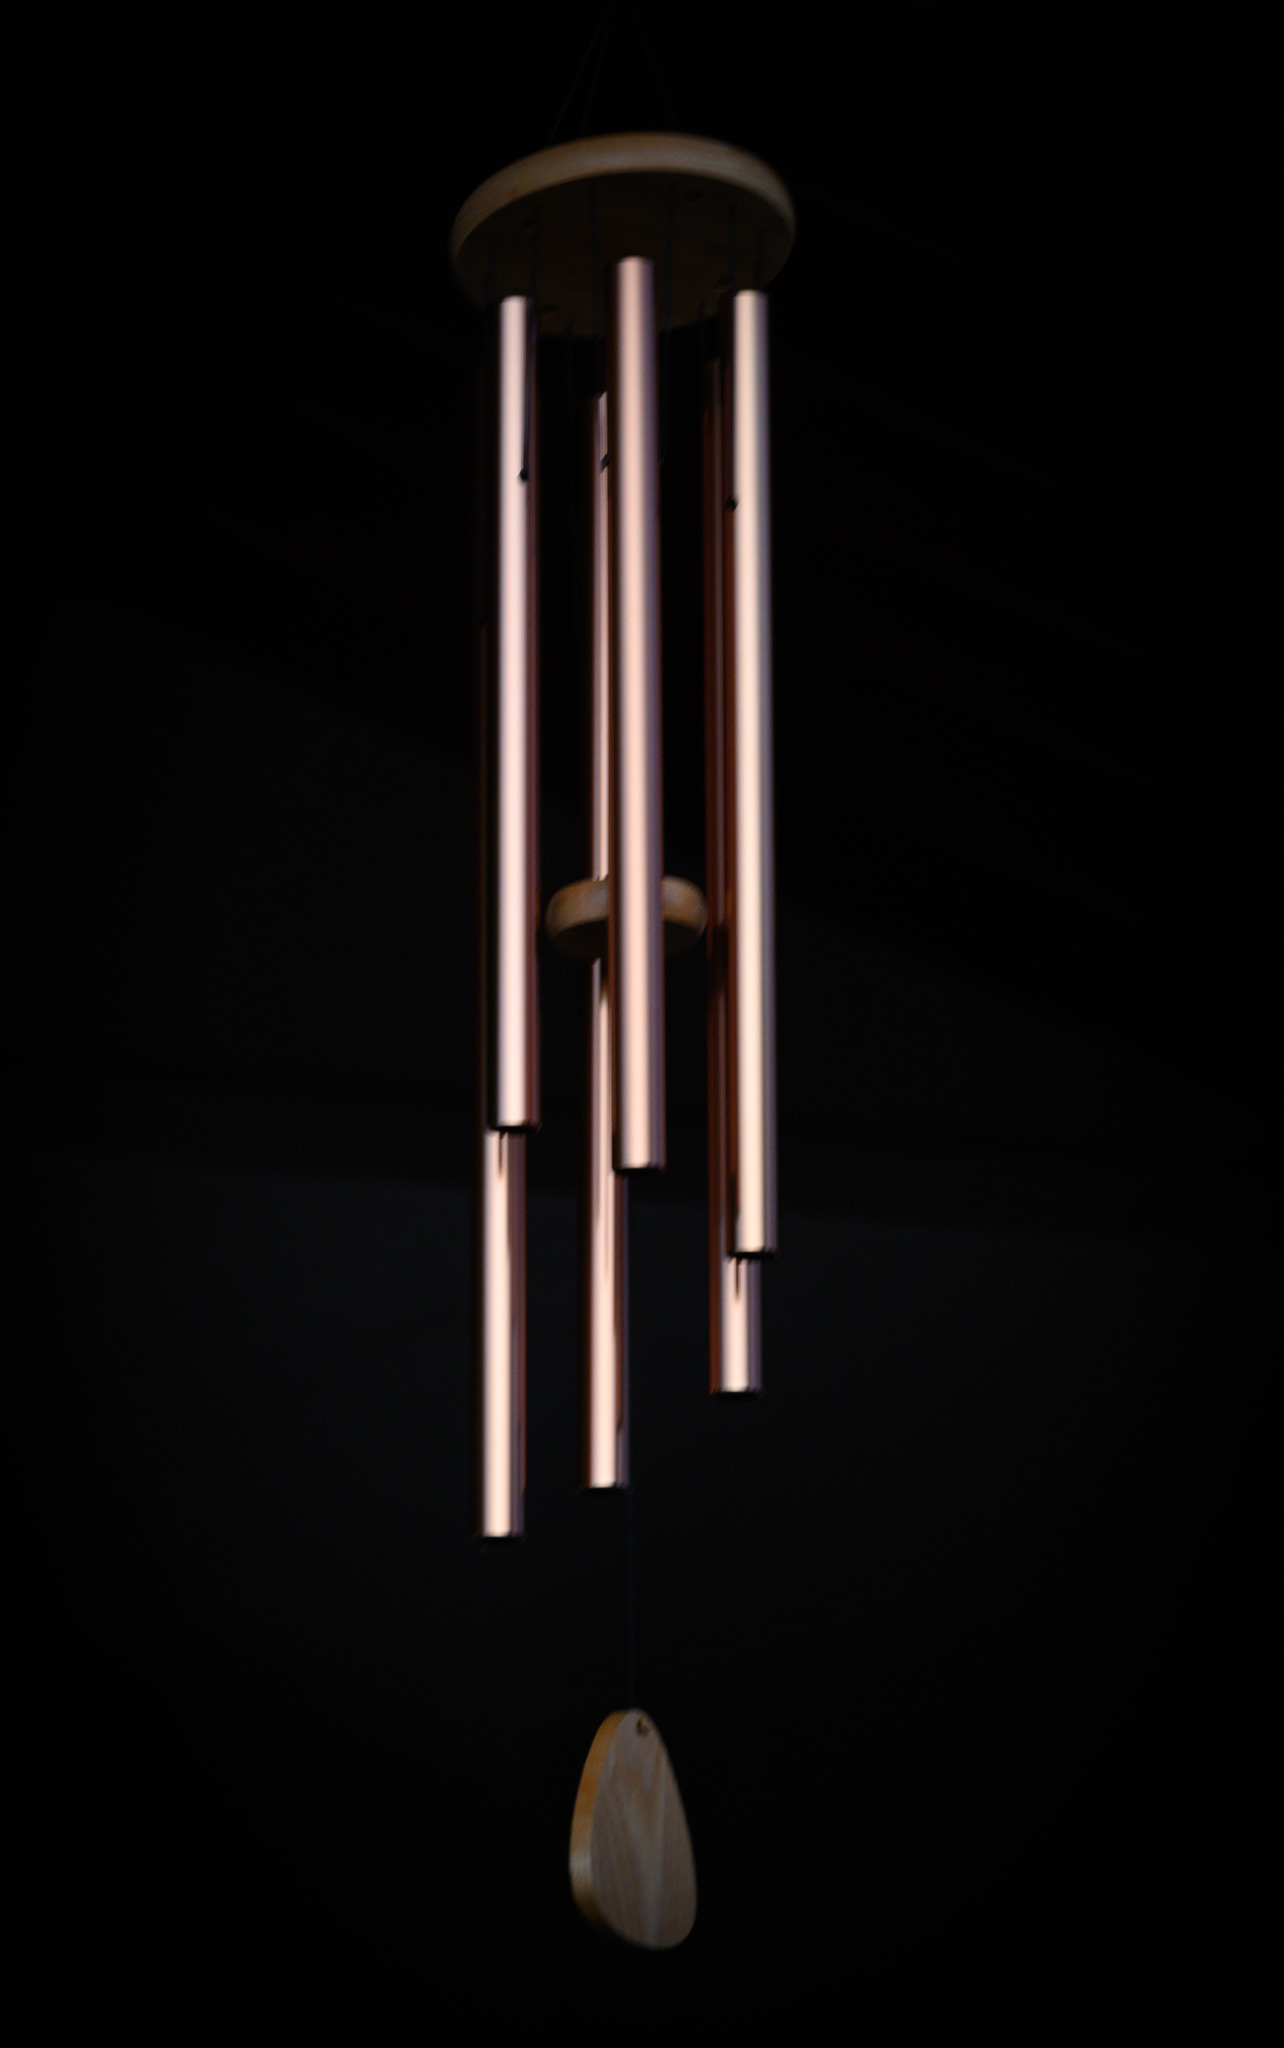 A set of brass chimes hanging against a darkened background